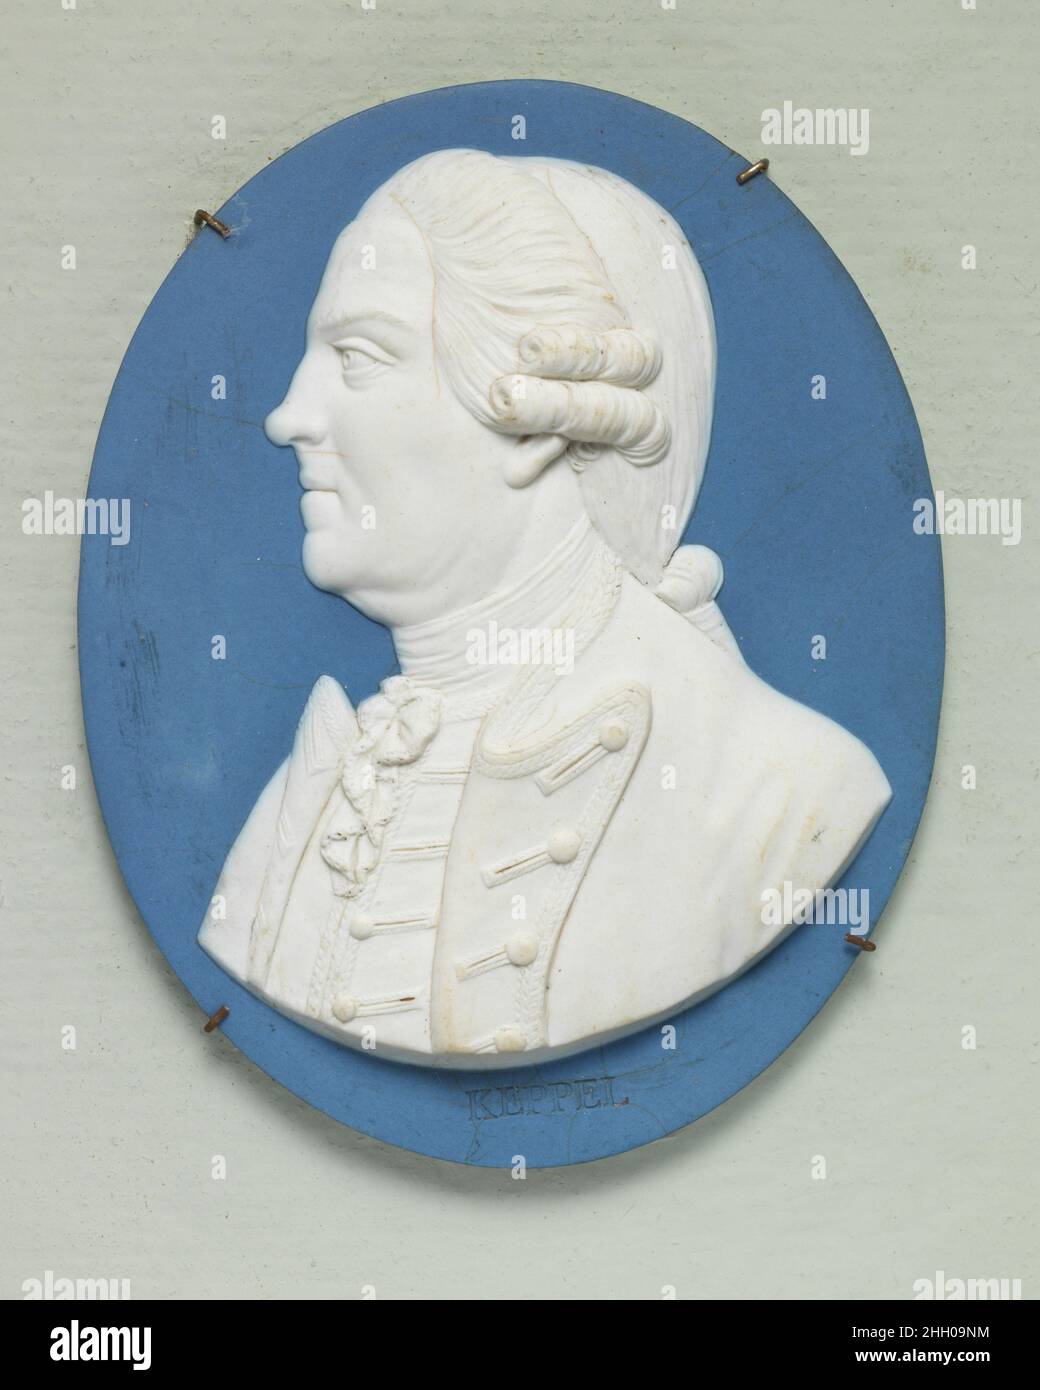 Augustus, Viscount Keppel ca. 1780 Wedgwood and Bentley Cameo medallions with portrait reliefs were made by Josiah Wedgwood between 1765 and 1795, with Thomas Bentley as his partner from 1769 to 1780. Black basalt and jasper are both types of fine stoneware hard enough for the delicate modeling which distinguishes Wedgwood's portrait cameos of 'Illustious Ancents and Moderns.'. Augustus, Viscount Keppel. British, Etruria, Staffordshire. ca. 1780. Jasper ware. Ceramics-Pottery Stock Photo